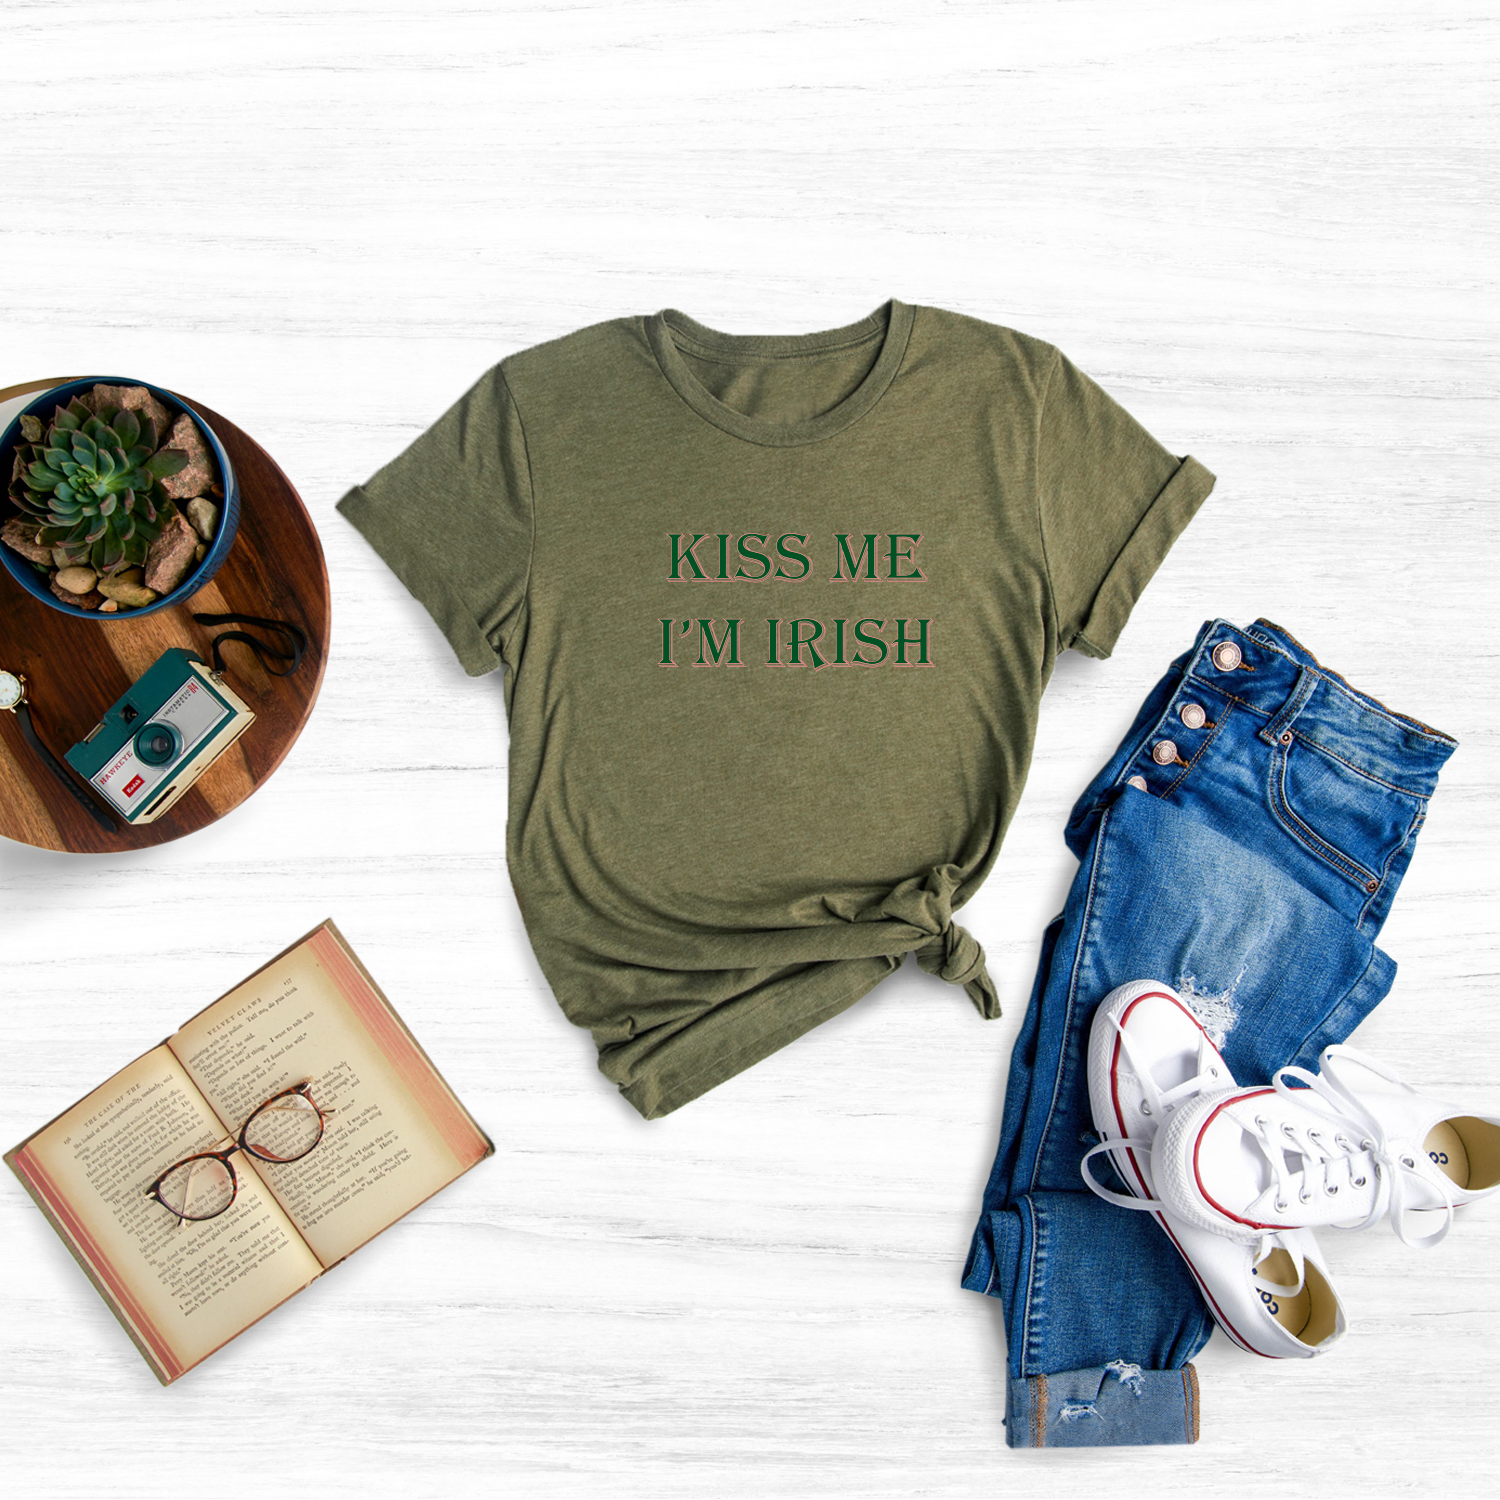 Get ready for some St. Patrick's Day kisses with this fun "Kiss Me I'm Irish" t-shirt.